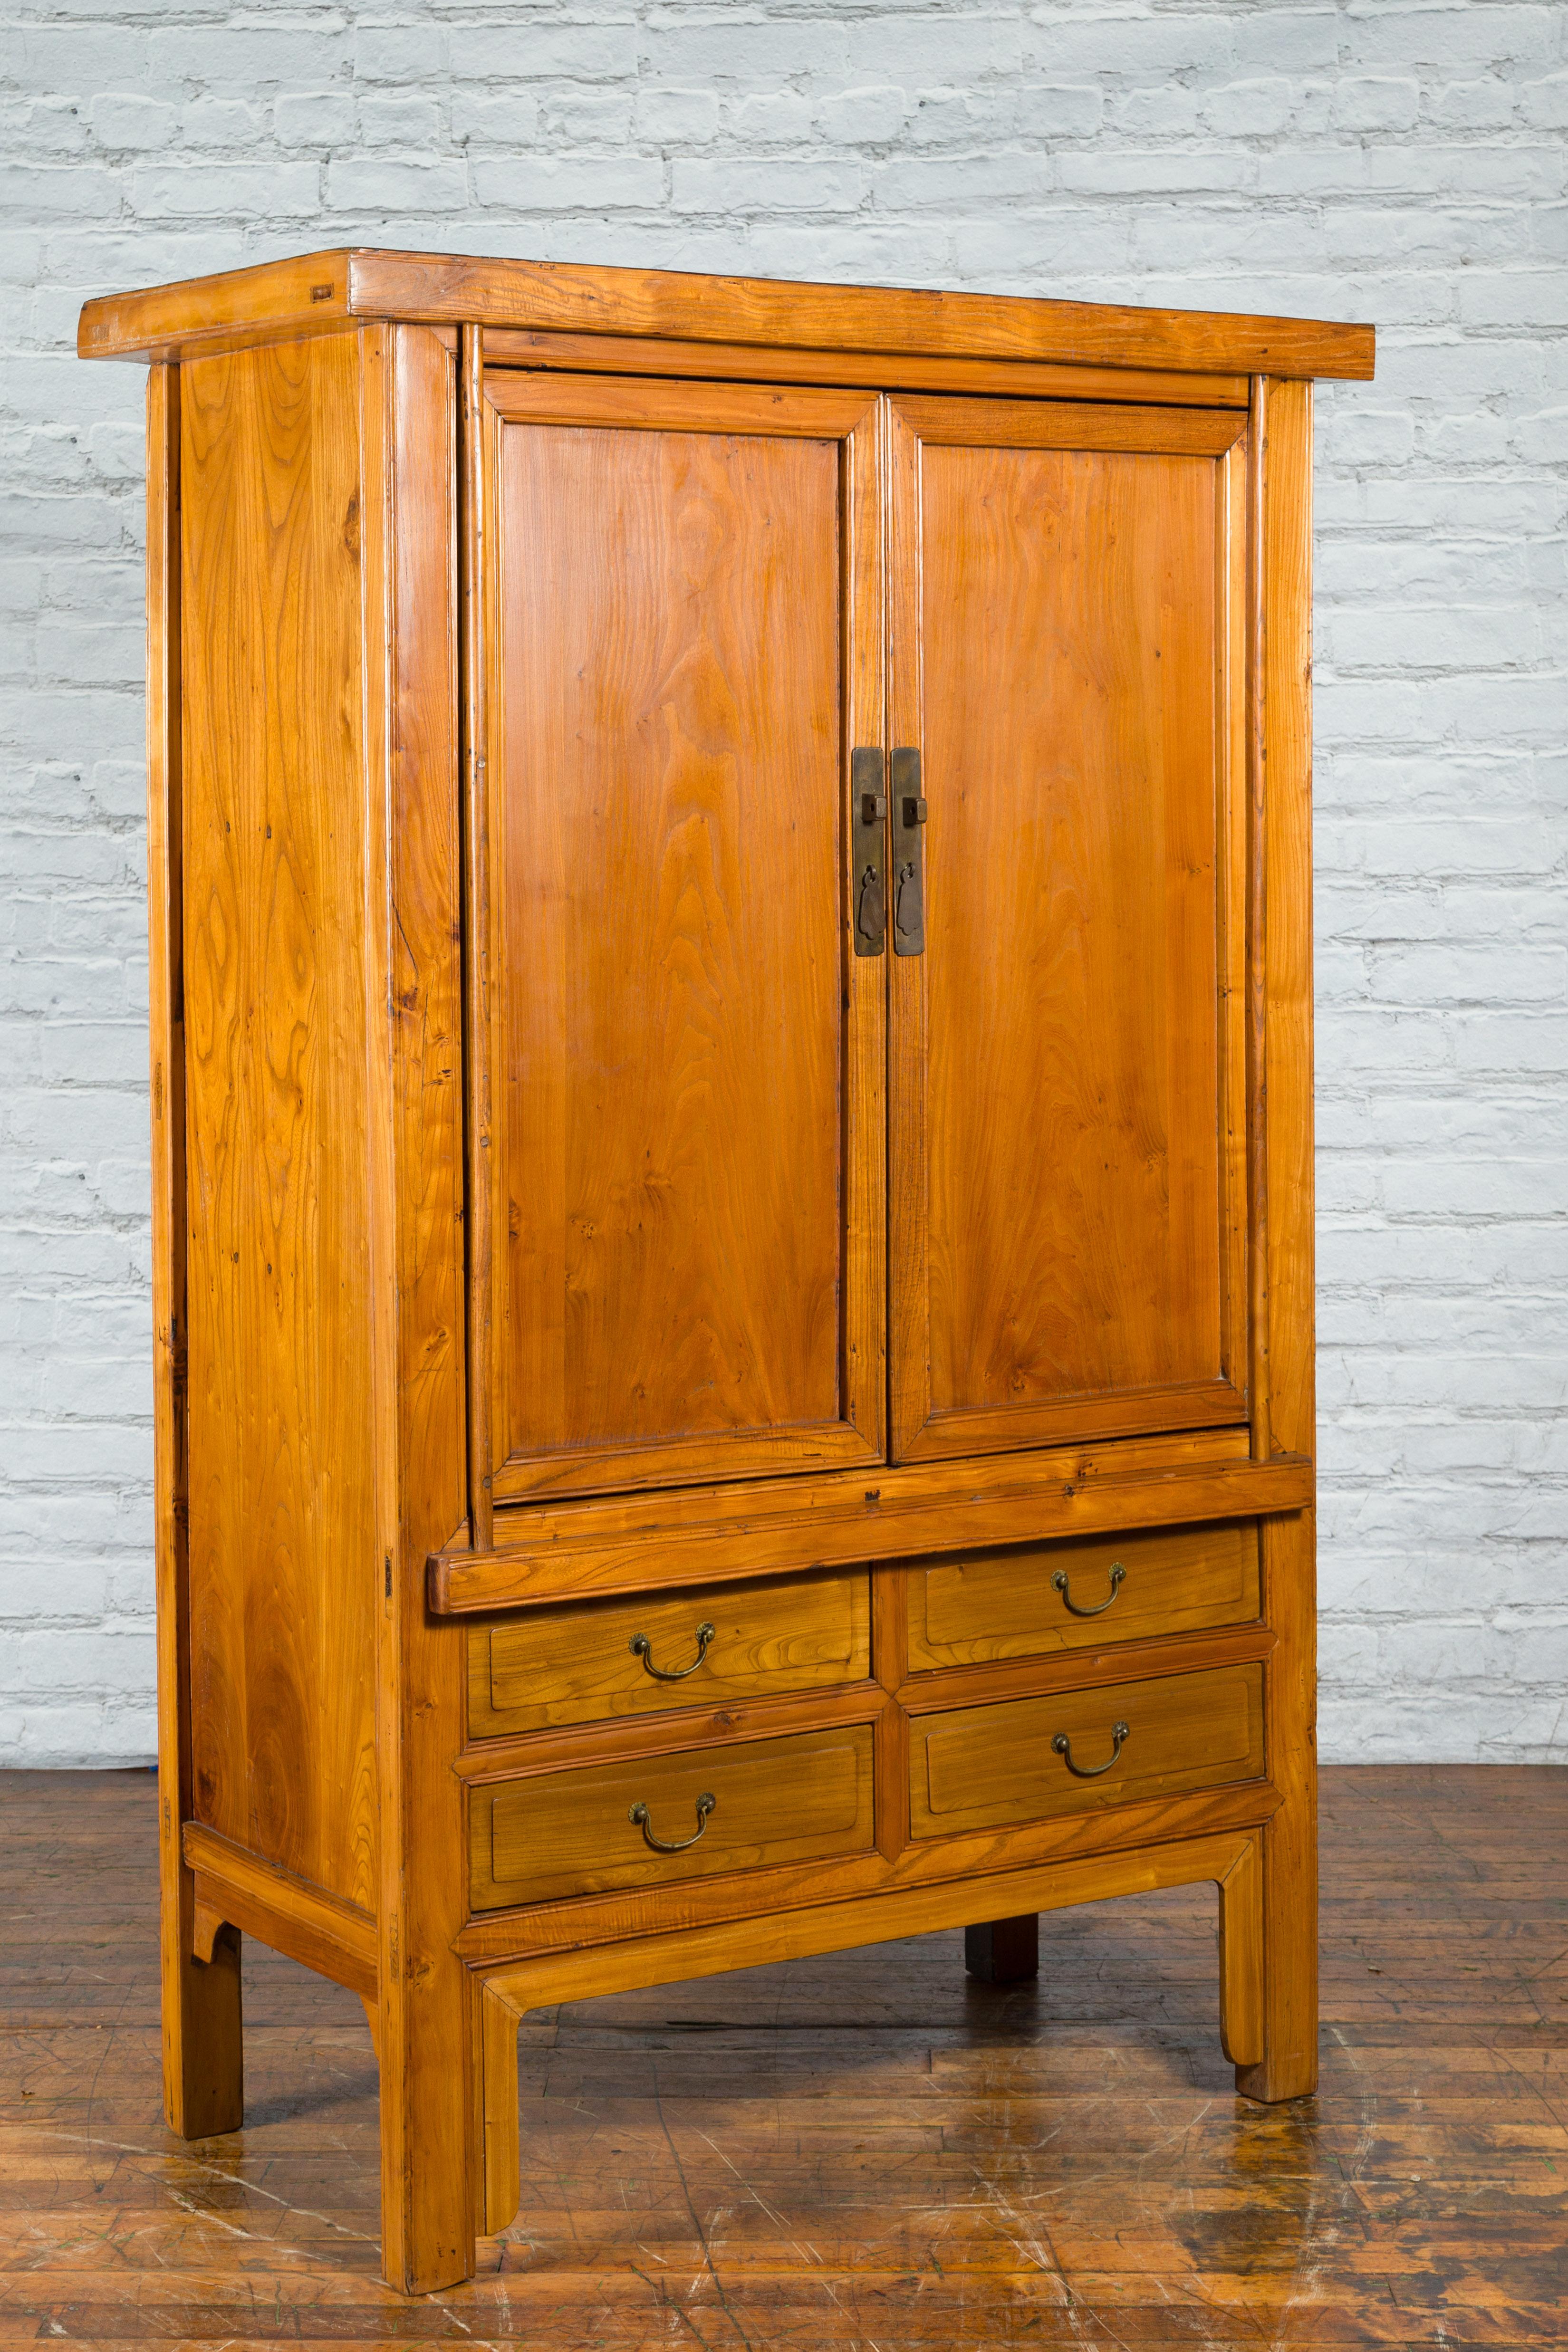 Chinese Qing Dynasty 19th Century Light Lacquer Cabinet with Doors and Drawers In Good Condition For Sale In Yonkers, NY